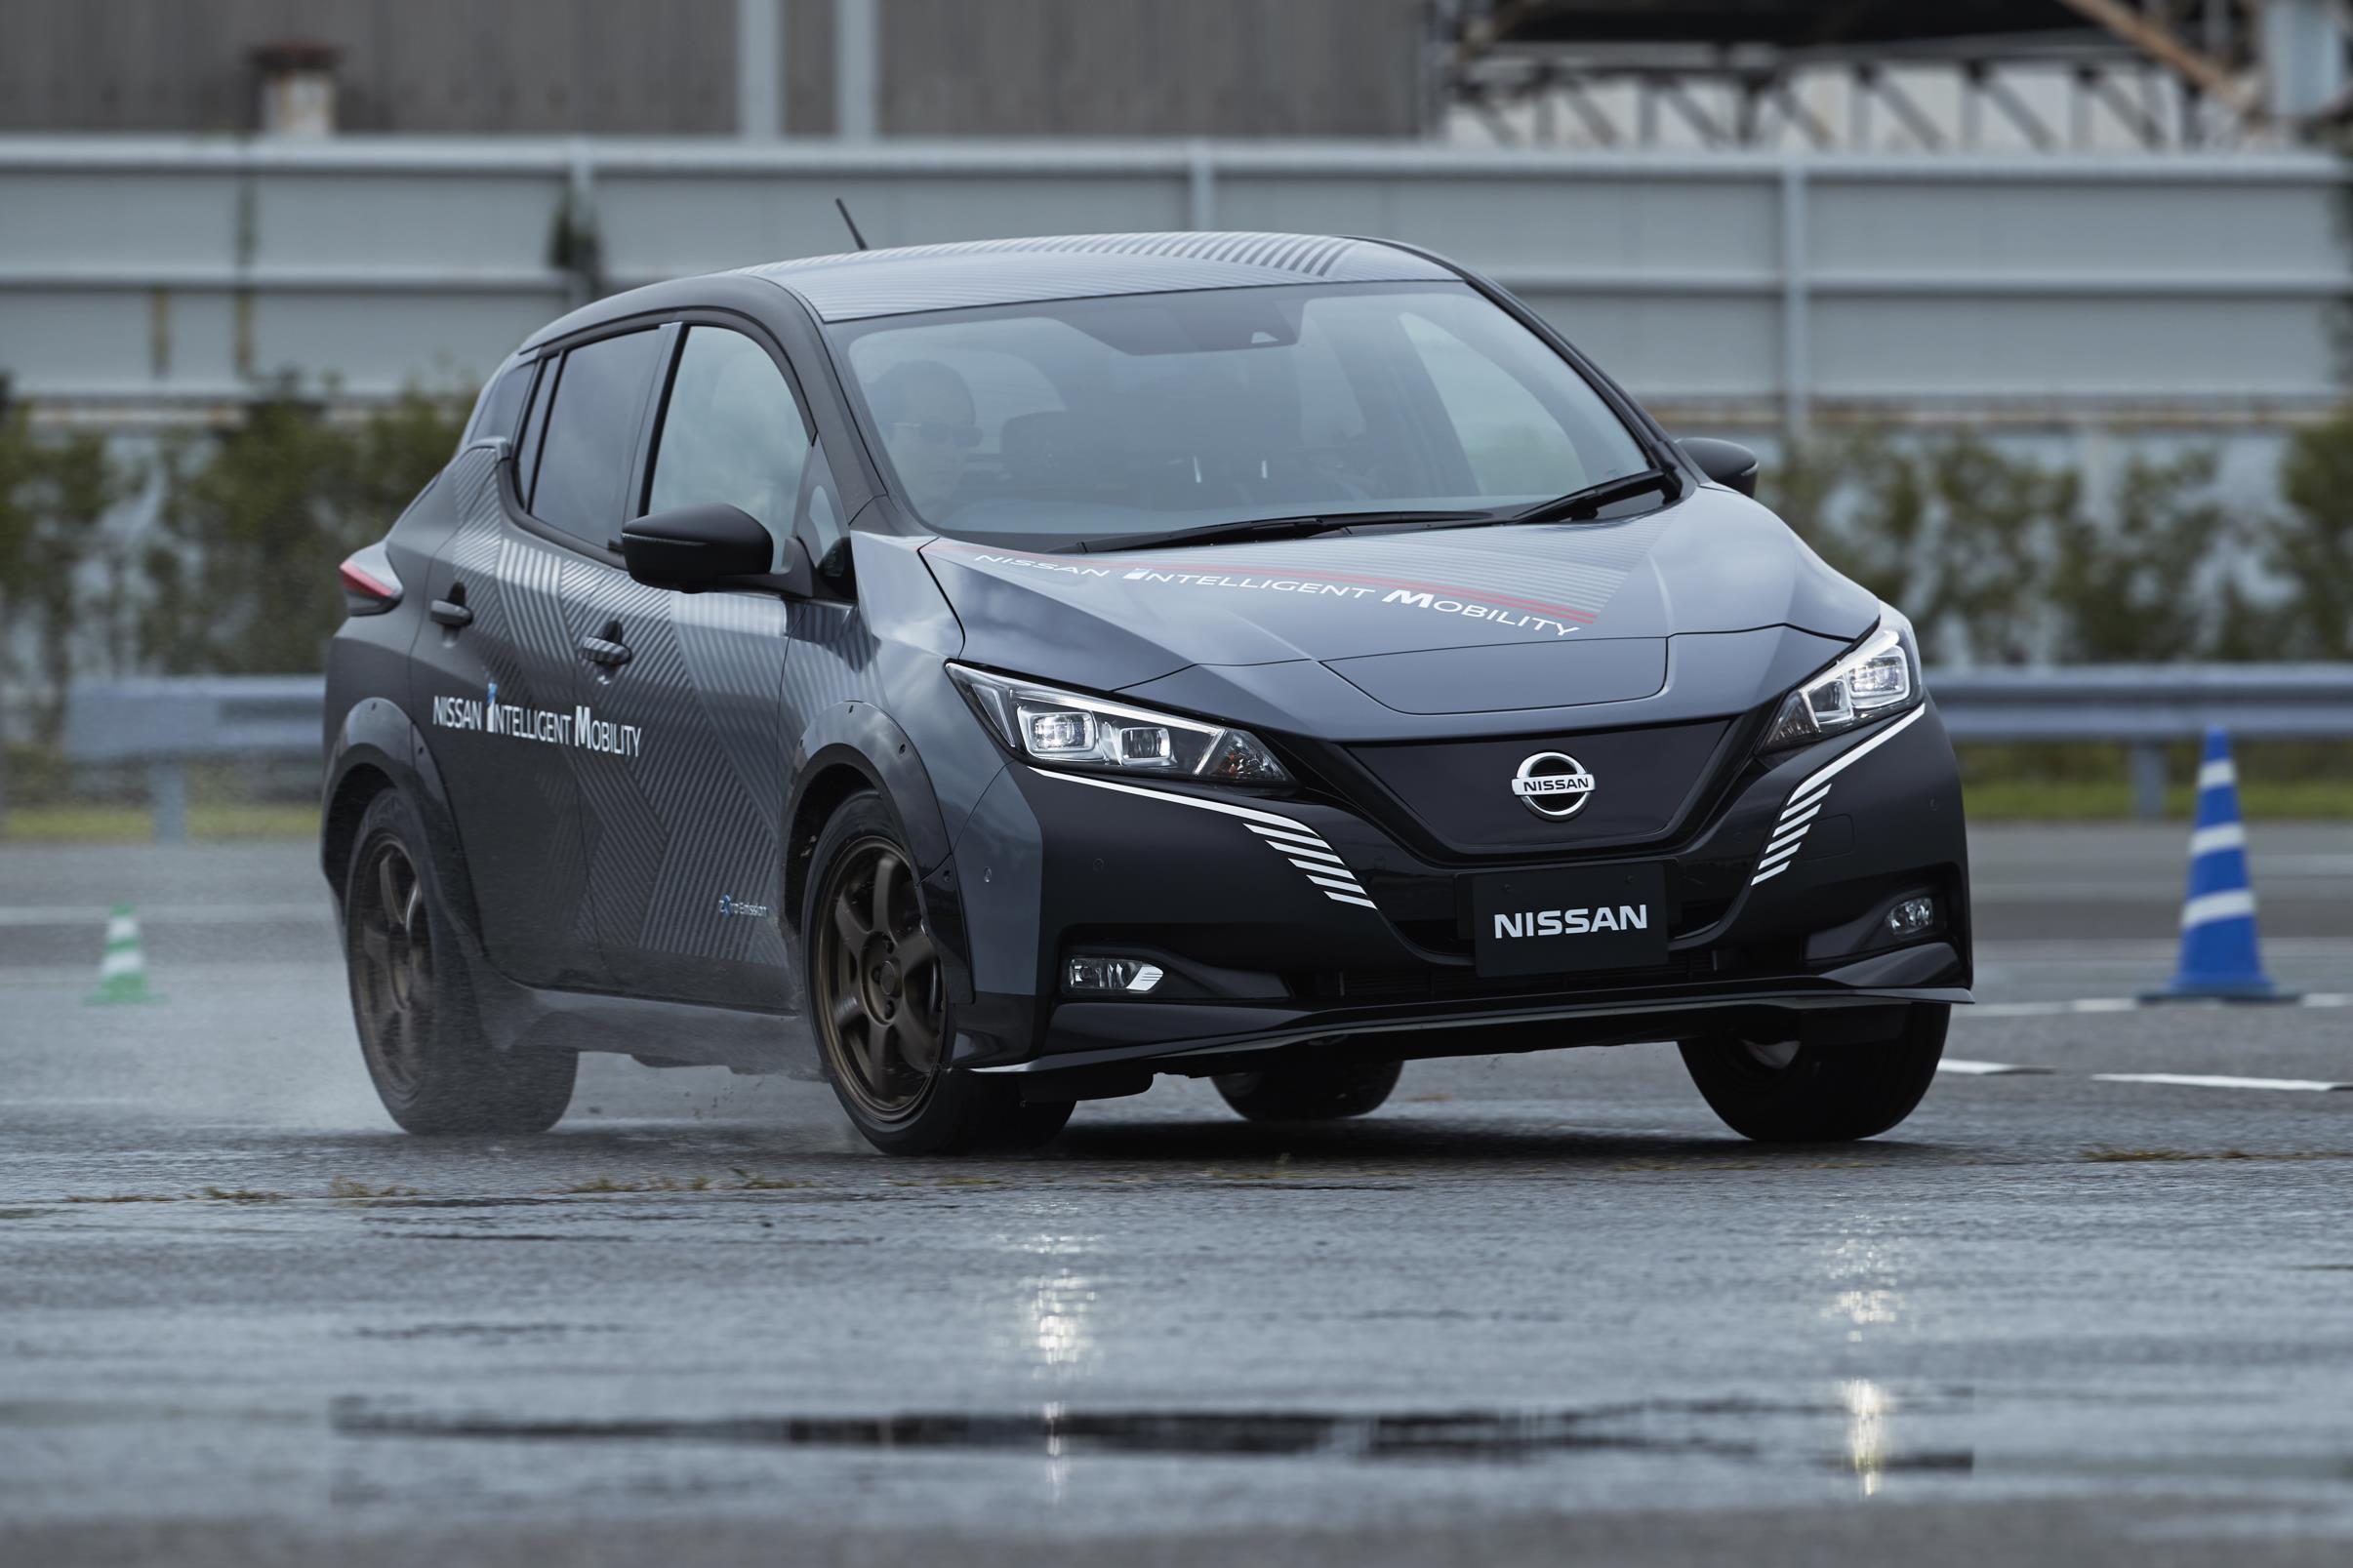 Nissan Shows Advanced All-Electric All-Wheel Drive at CES